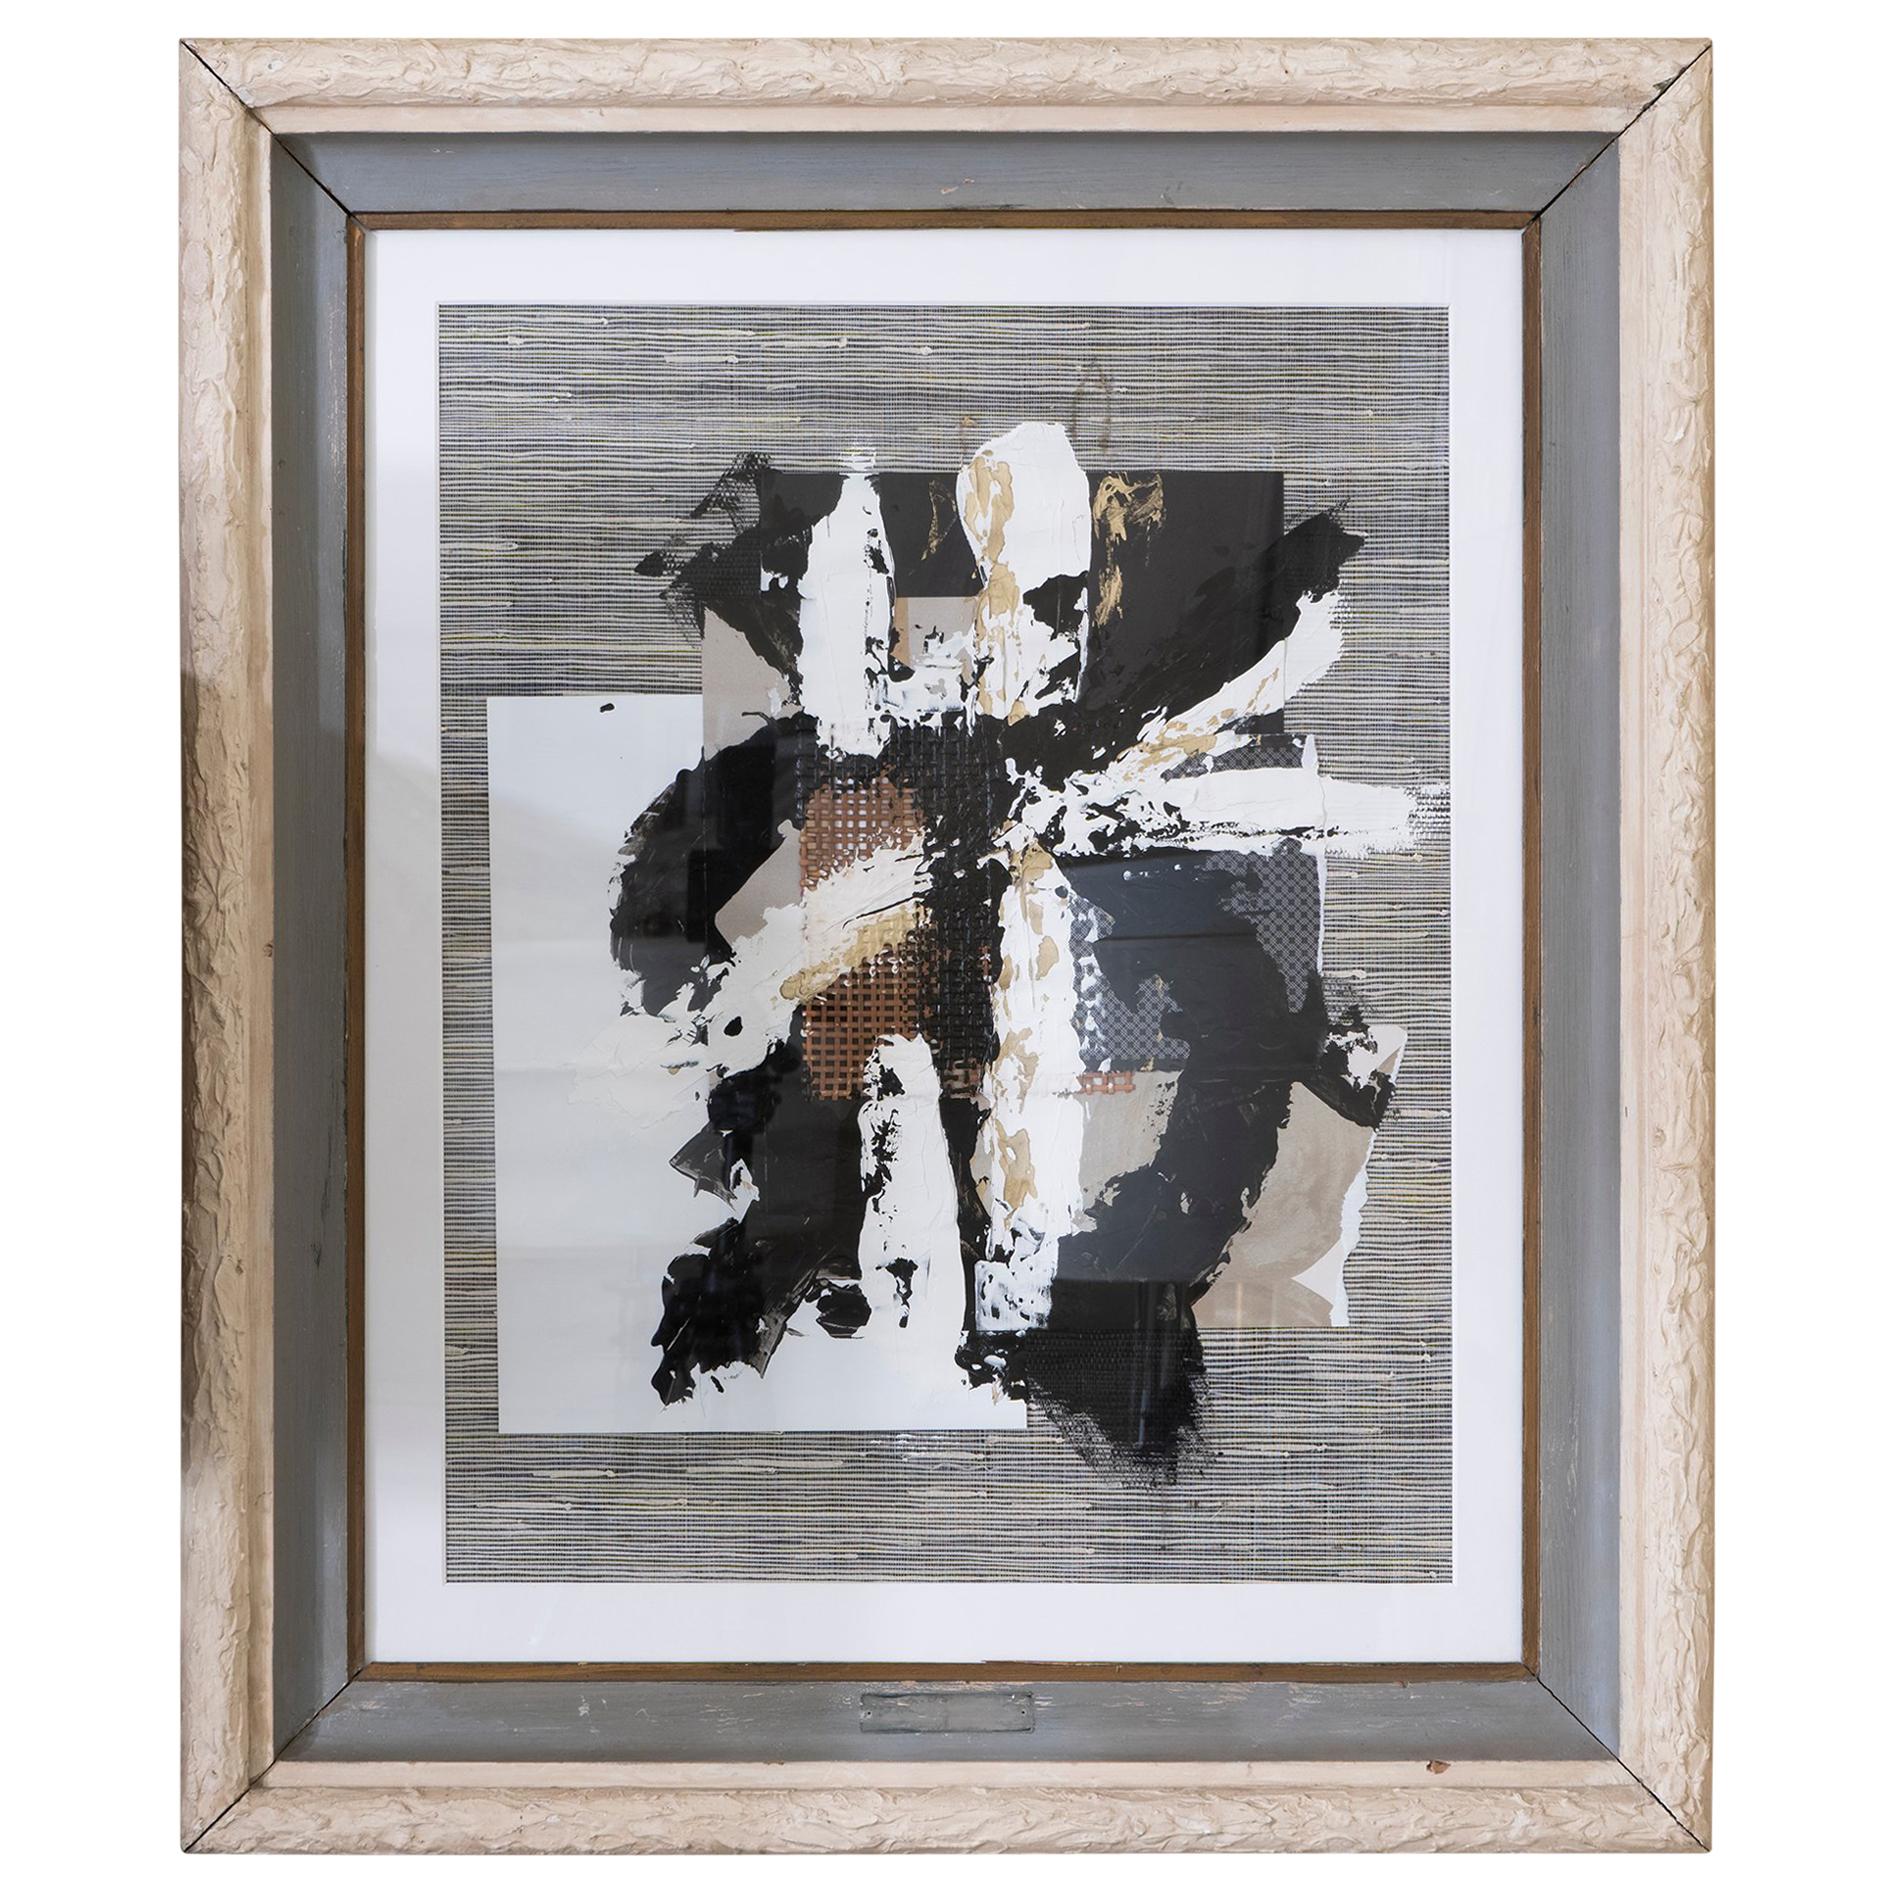 Marco Croce "Untitled" Collage Wall Art, Wood Vintage Frame, Italy, 2018